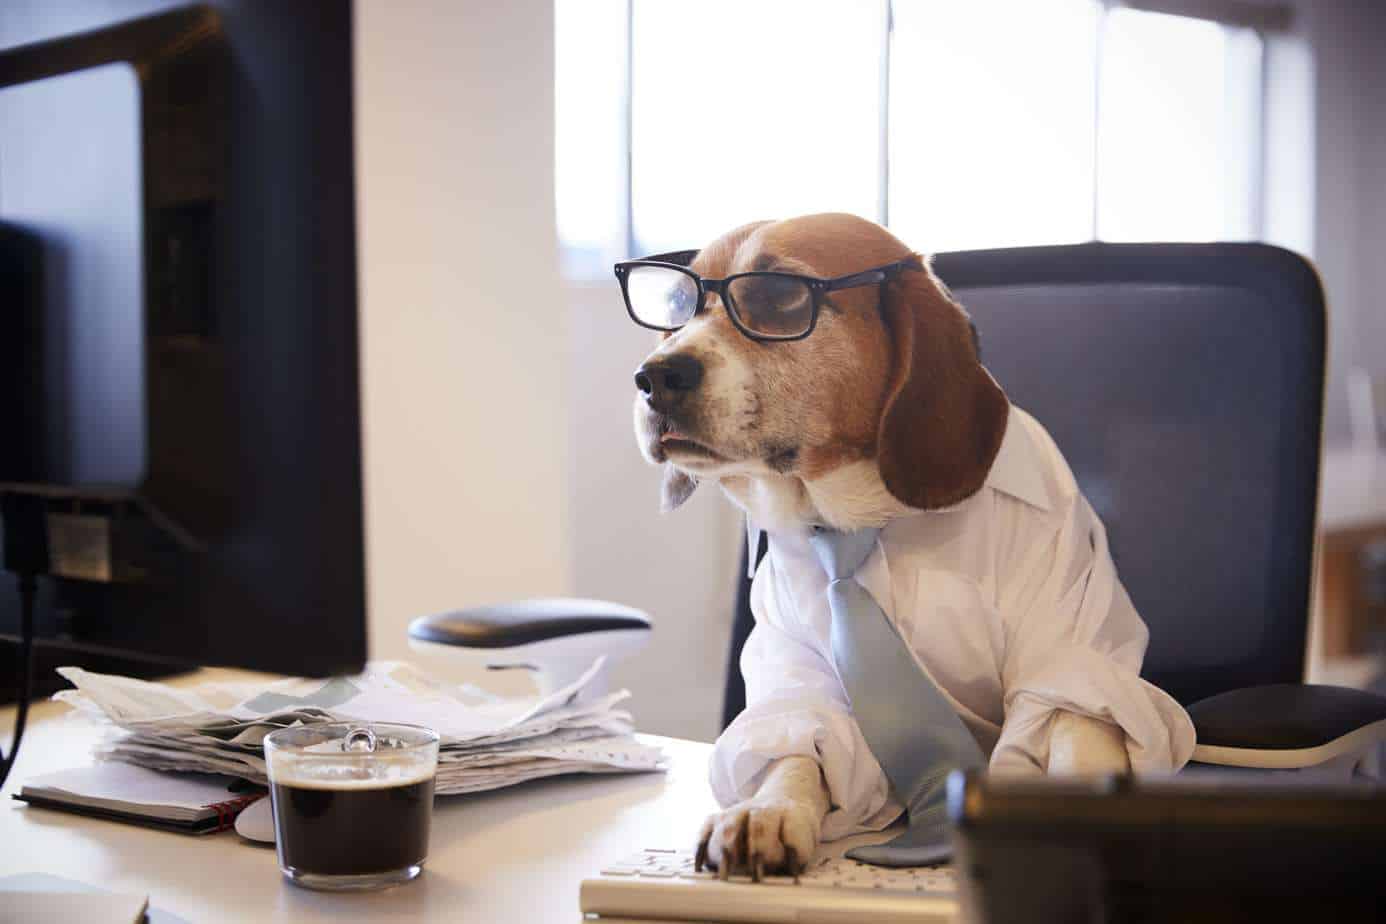 Beagle wearing shirt, tie and glasses while working at computer in office. Apply work lessons from your dog to be more effective.